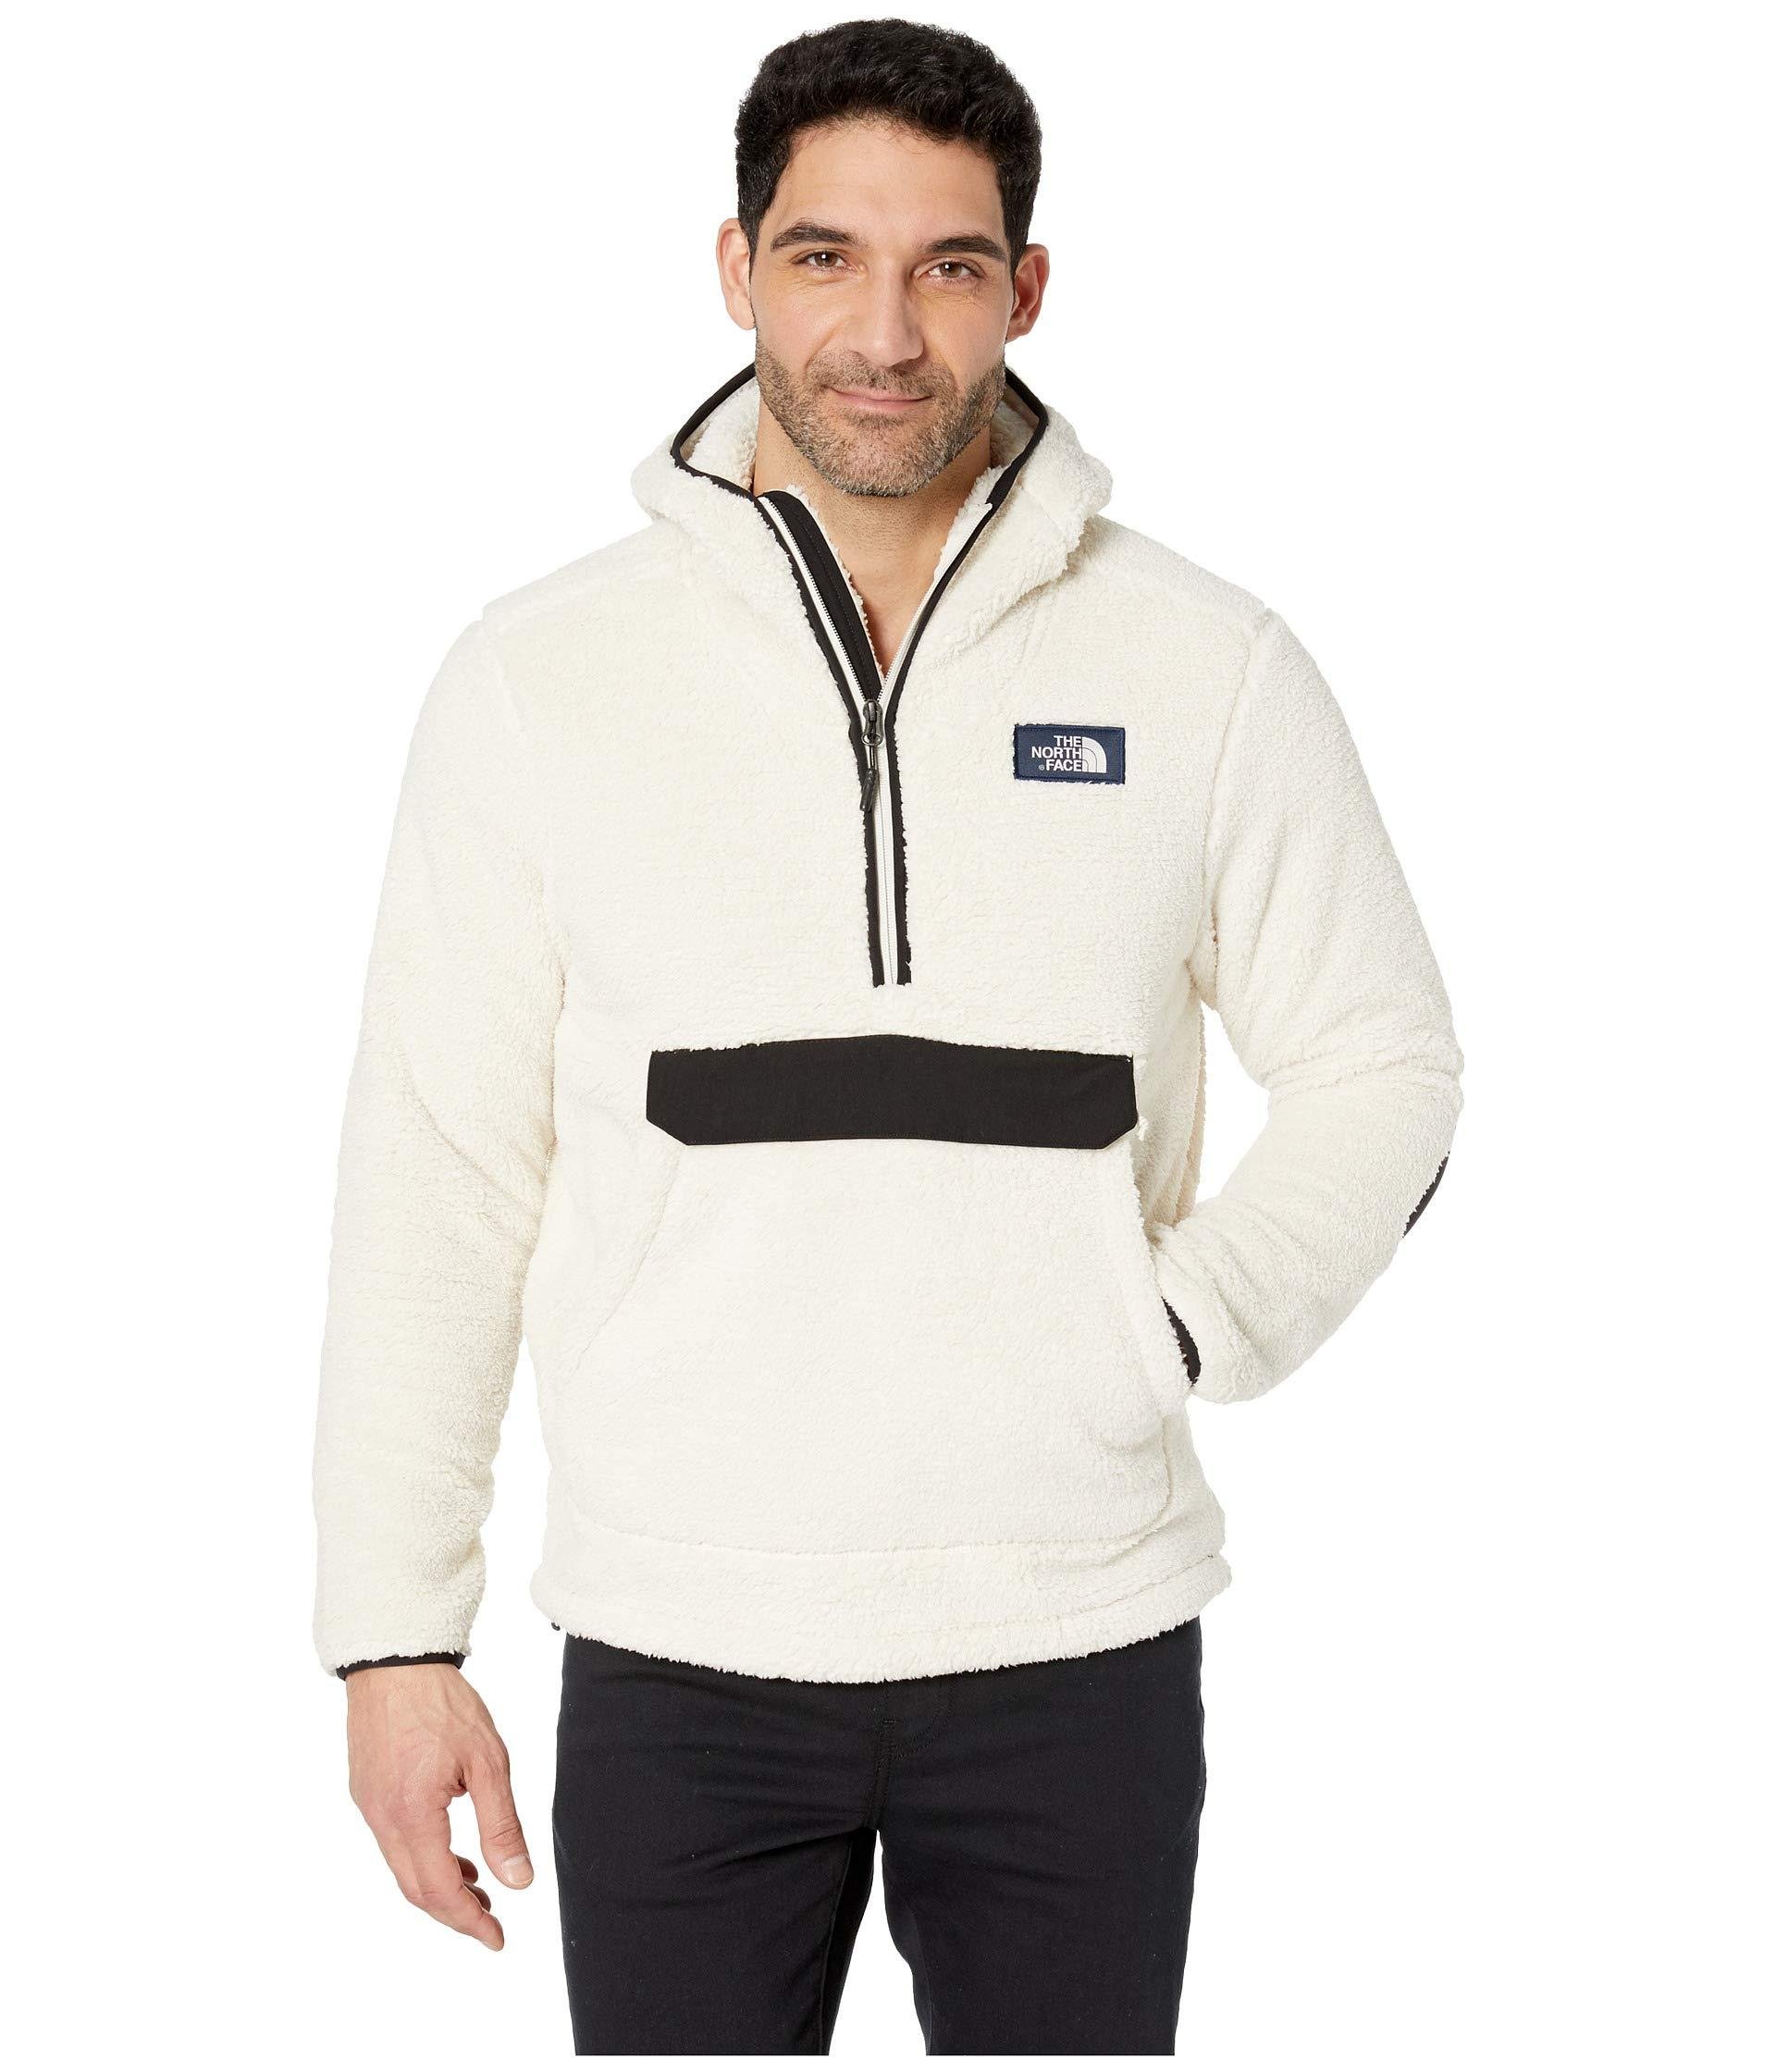 The North Face Fleece Campshire Pullover Hoodie in White for Men - Lyst